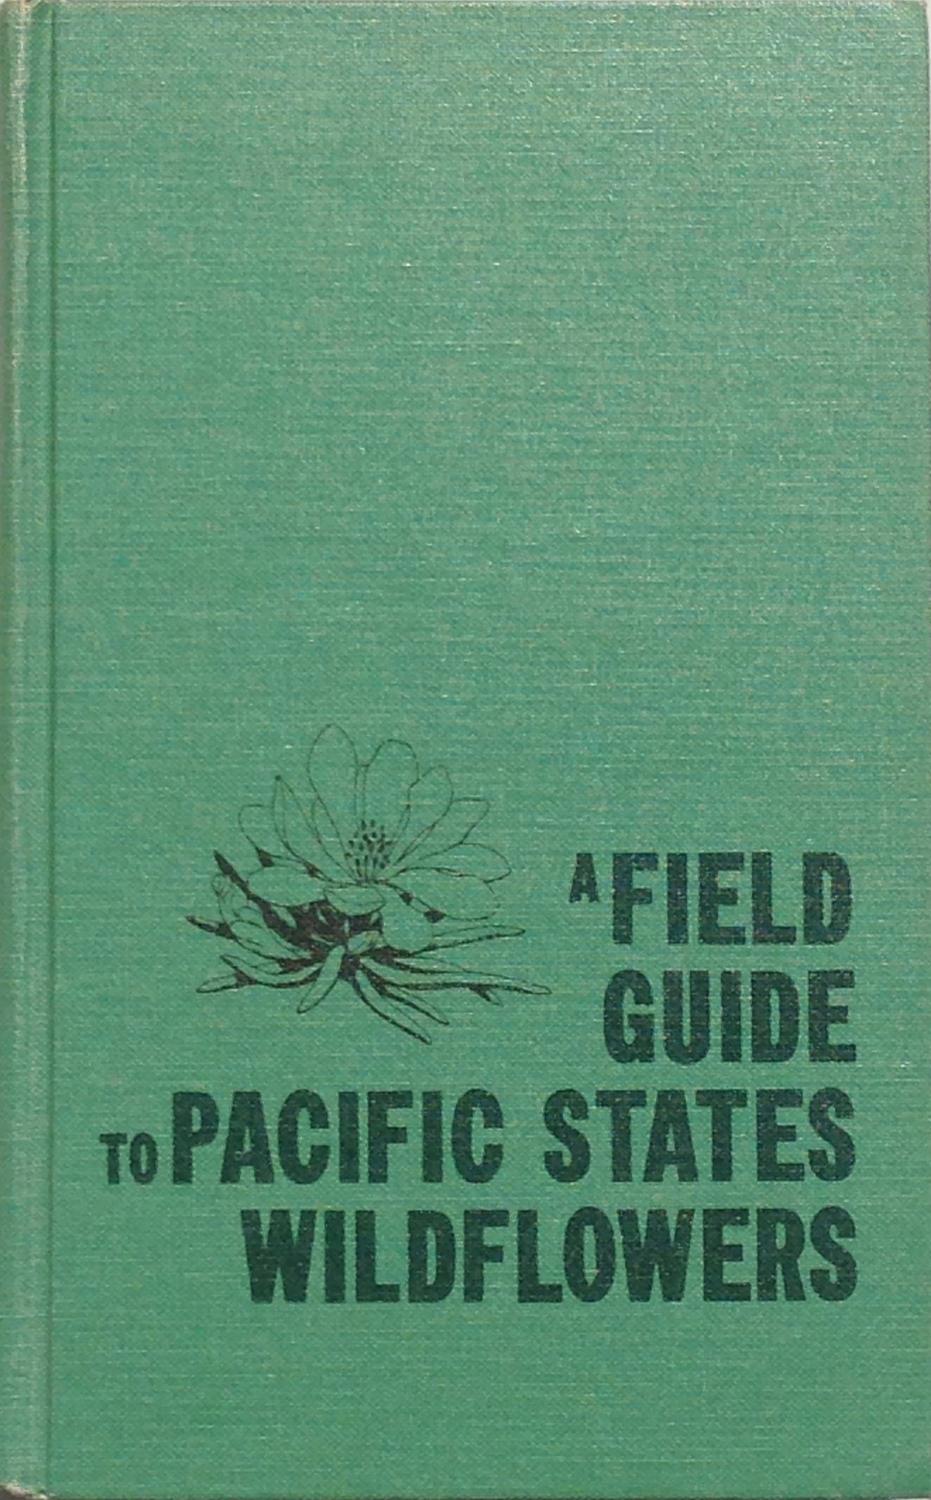 A field guide to Pacific States wildflowers - Niehaus, T.; Ripper, C.L. (ill.)